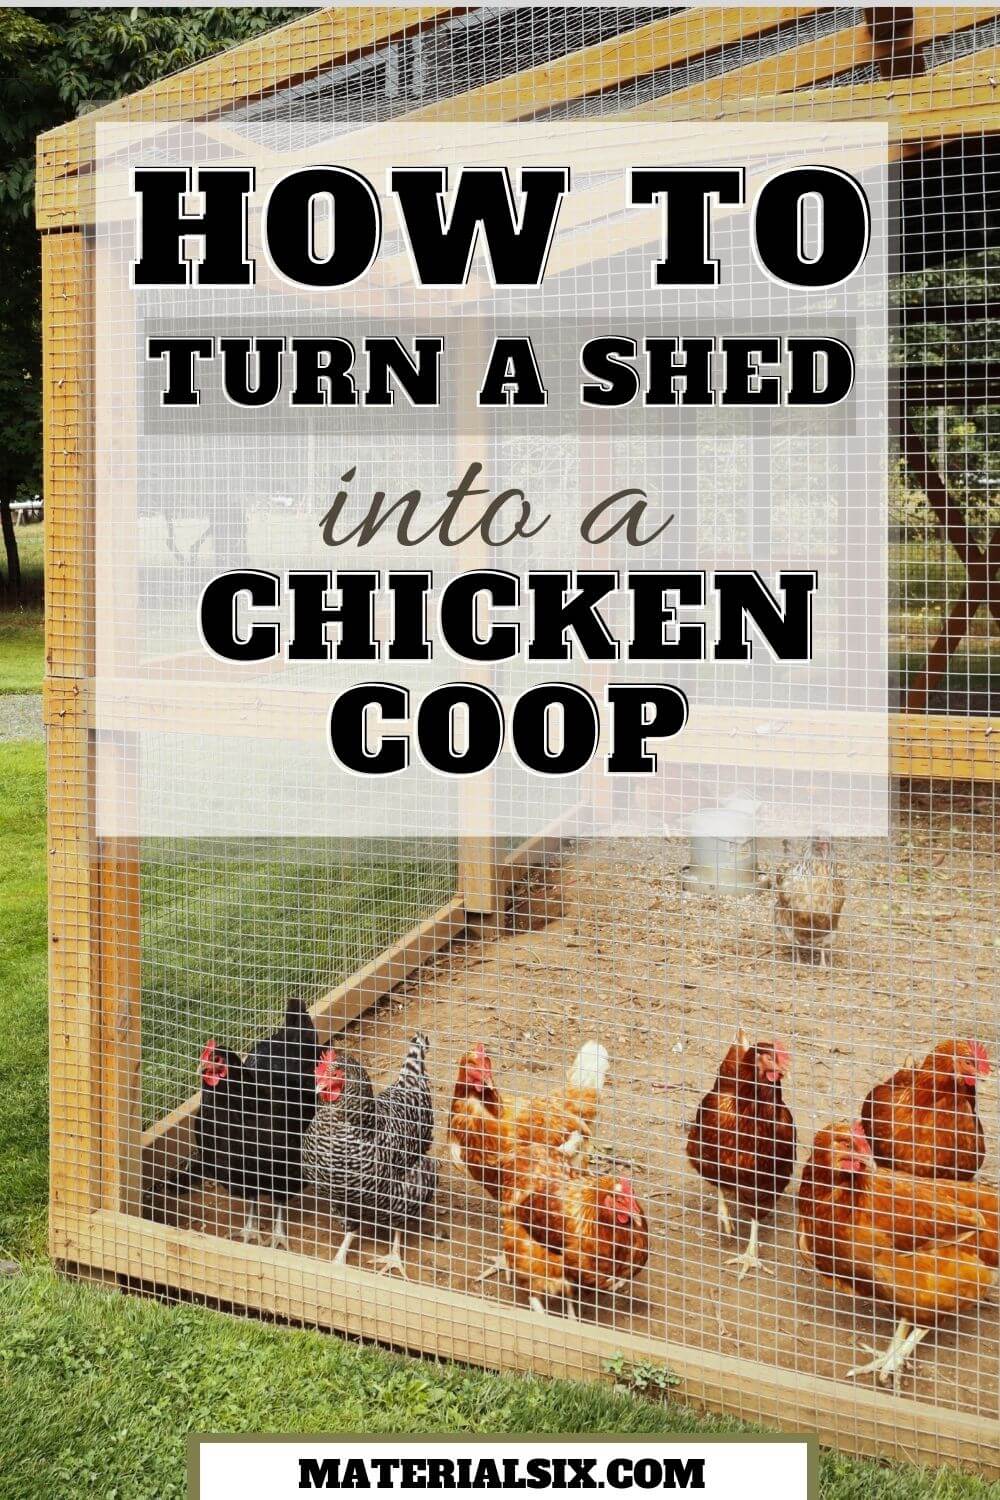 How to Turn a Shed into a Chicken Coop